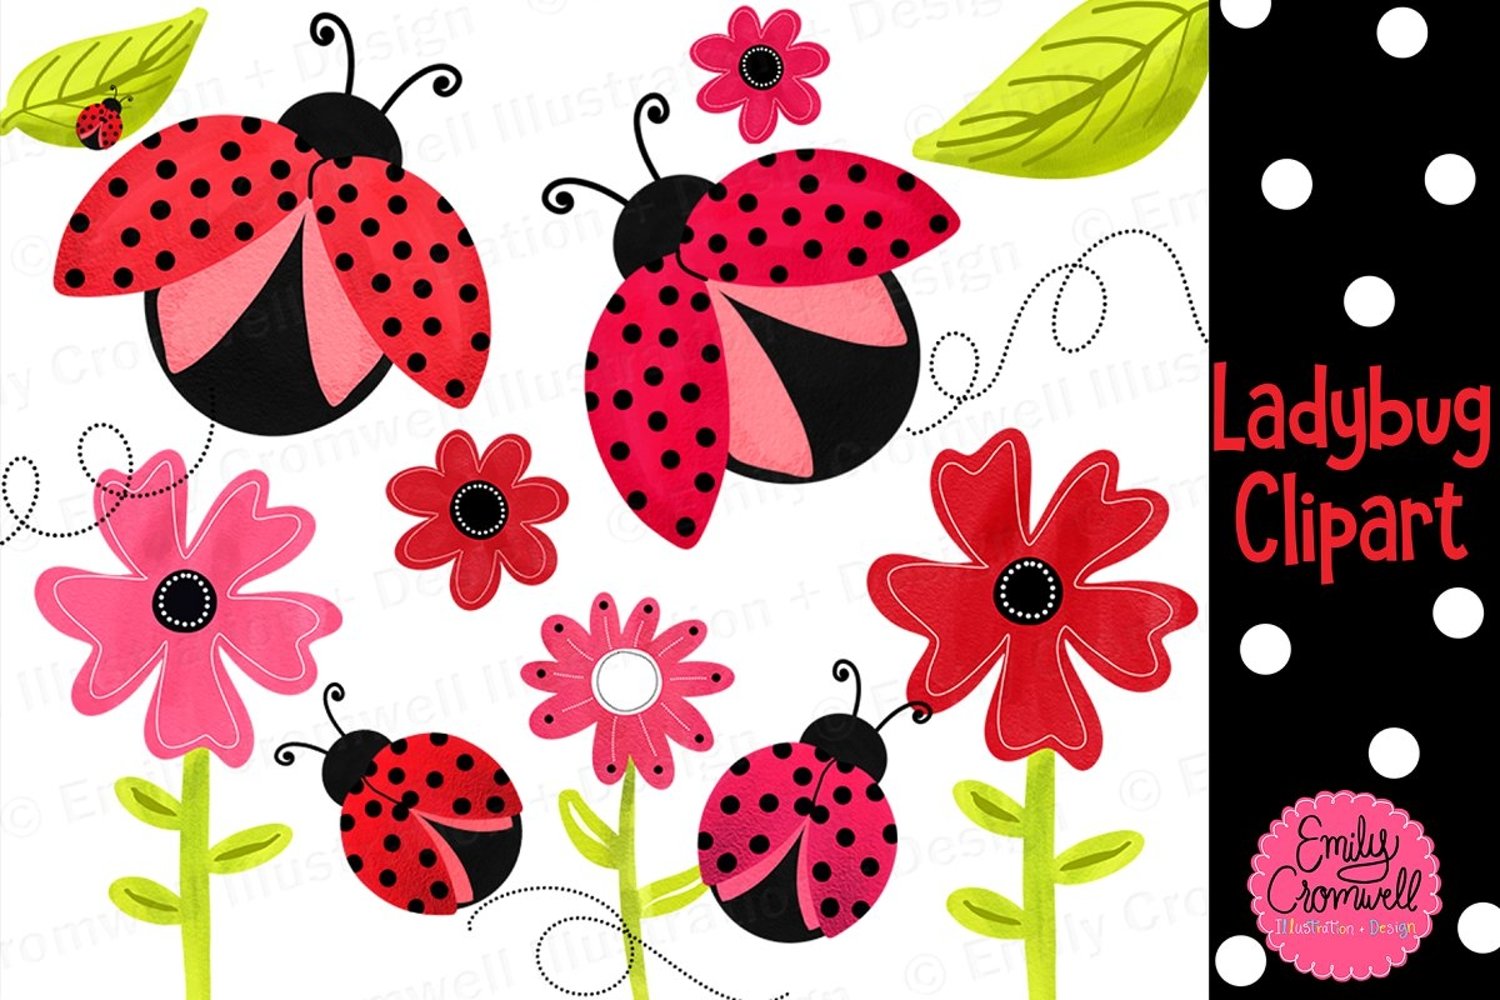 Cover image of Ladybug Clipart.